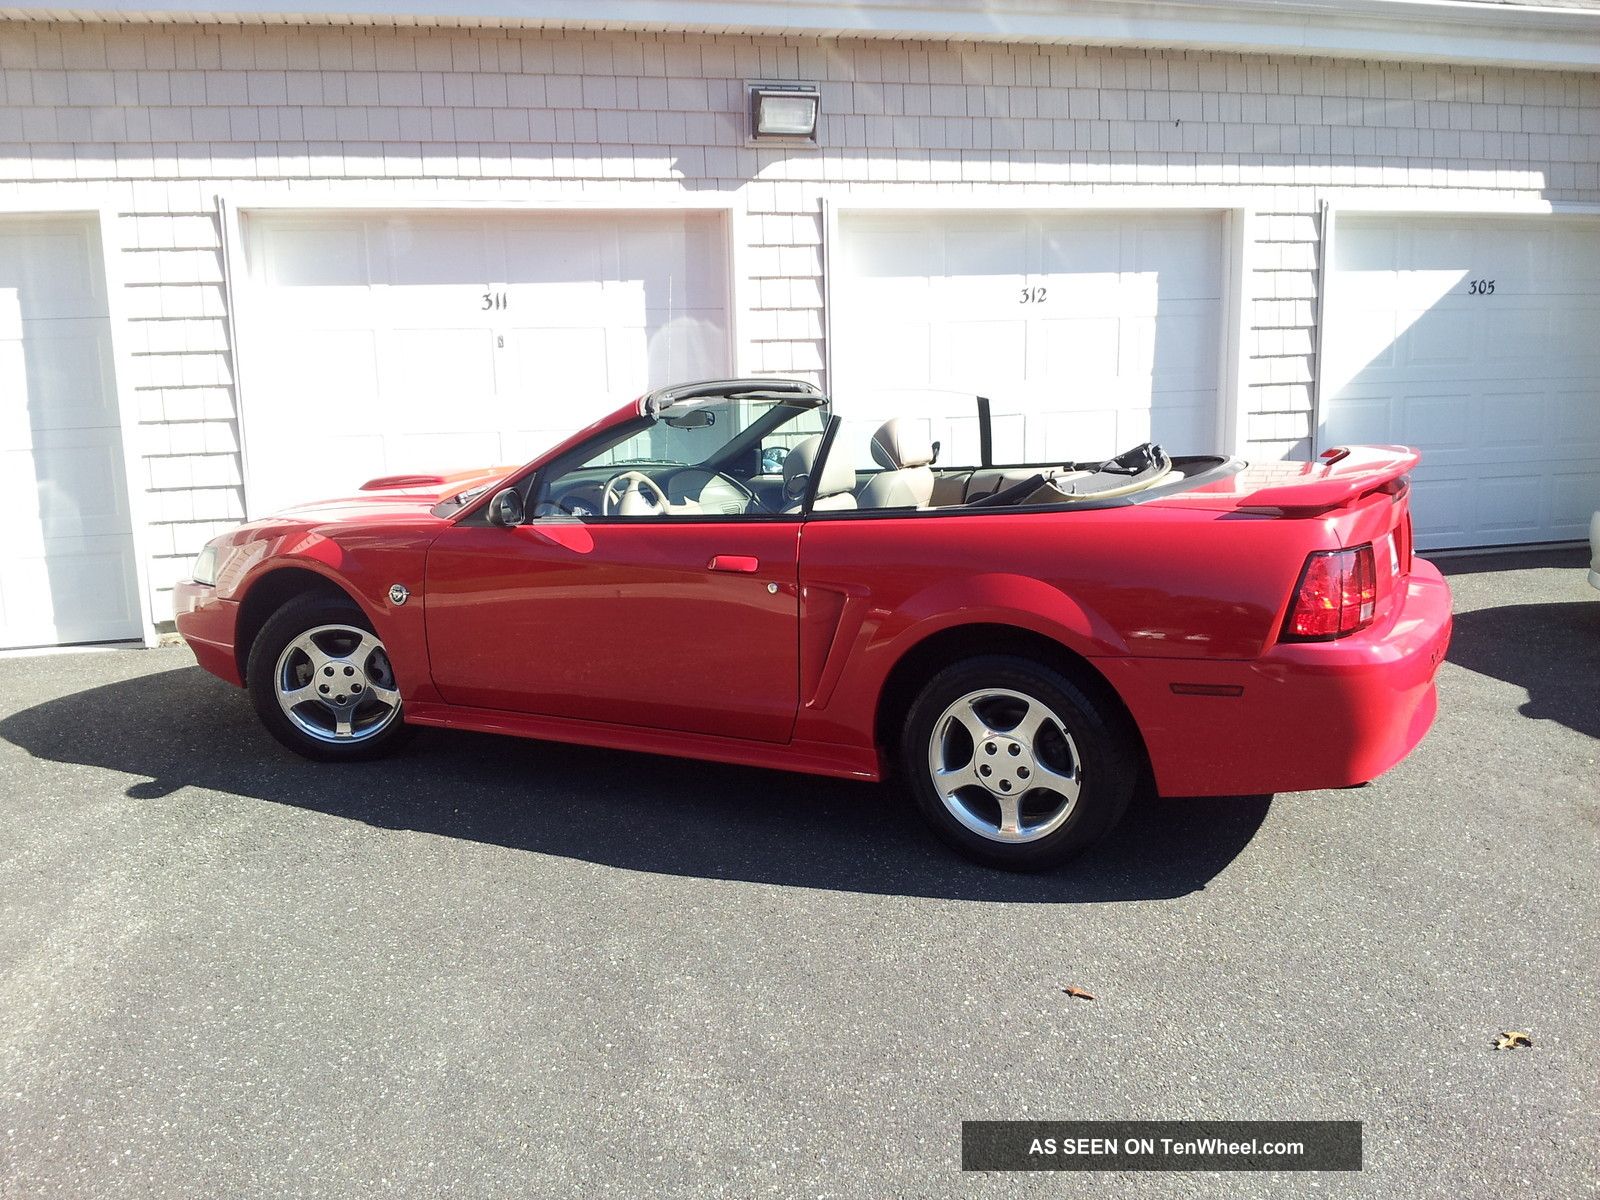 2004 Ford mustang convertible 40th anniversary edition specs #3